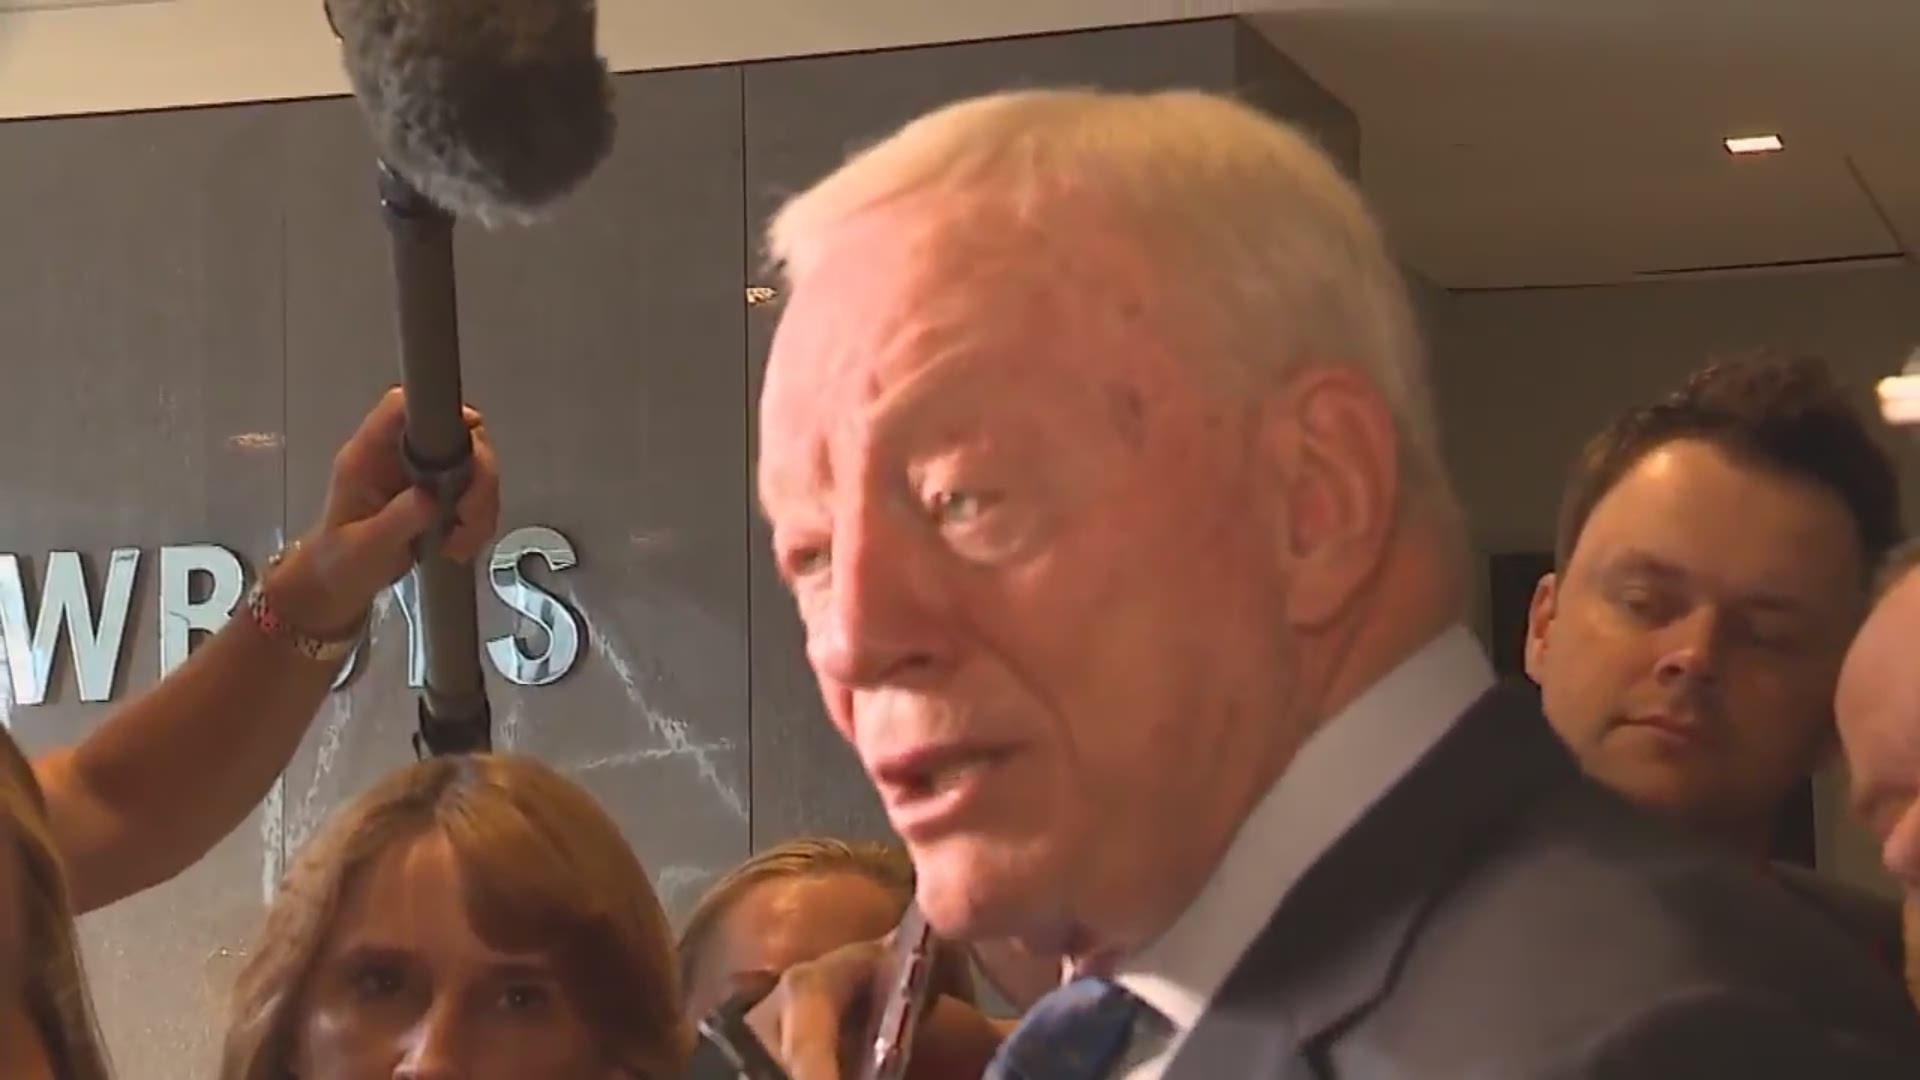 Cowboys owner Jerry Jones reacts to Travis Frederick's Guillain-Barr� syndrome diagnosis. WFAA.com